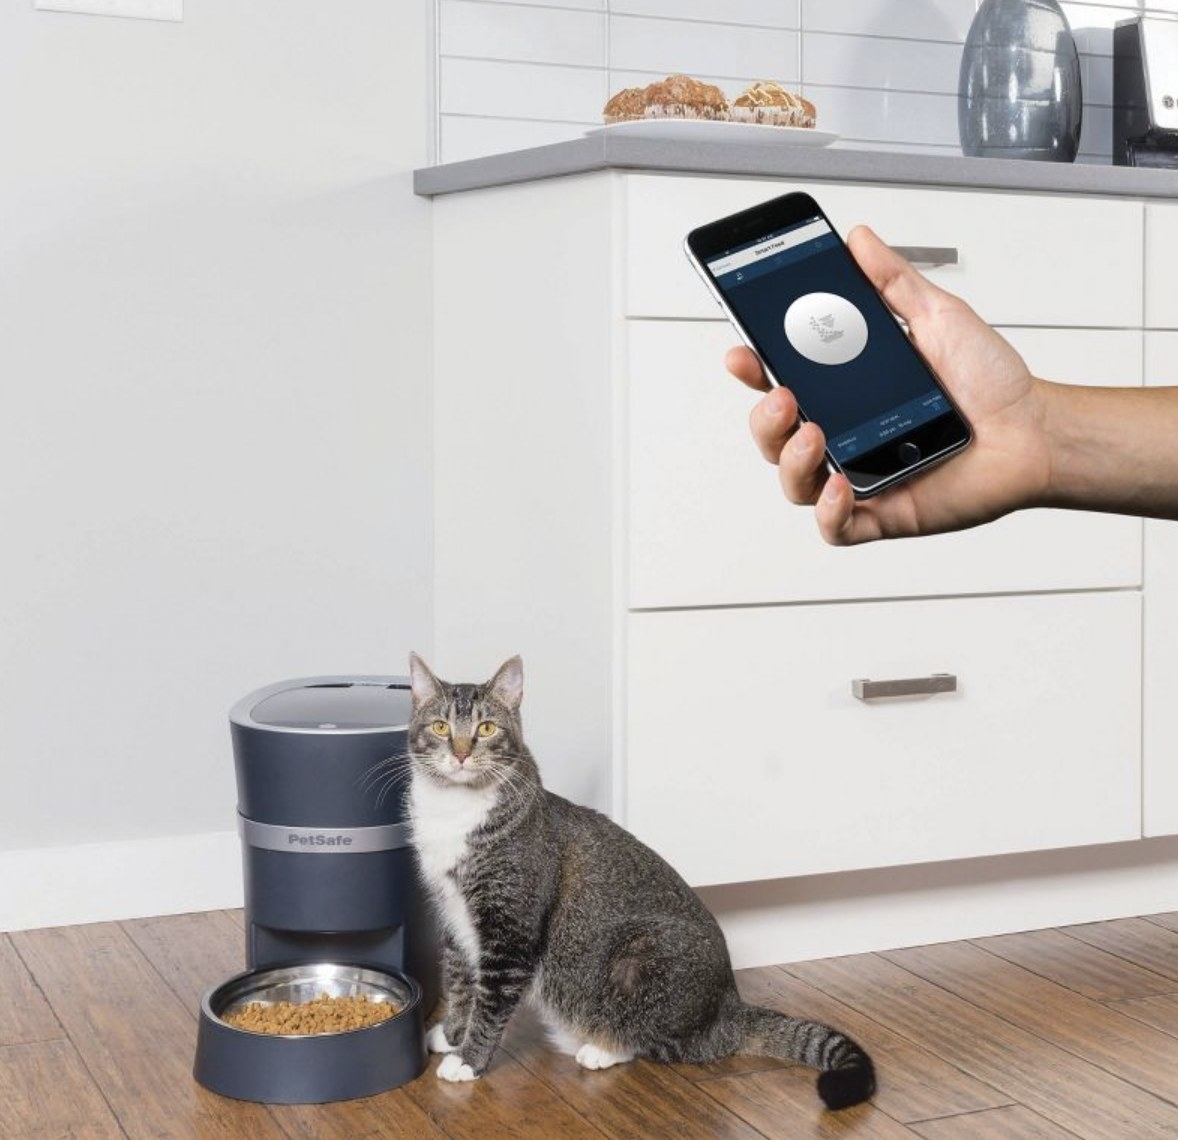 A model feeding their cat using an automatic feeder controlled on the phone